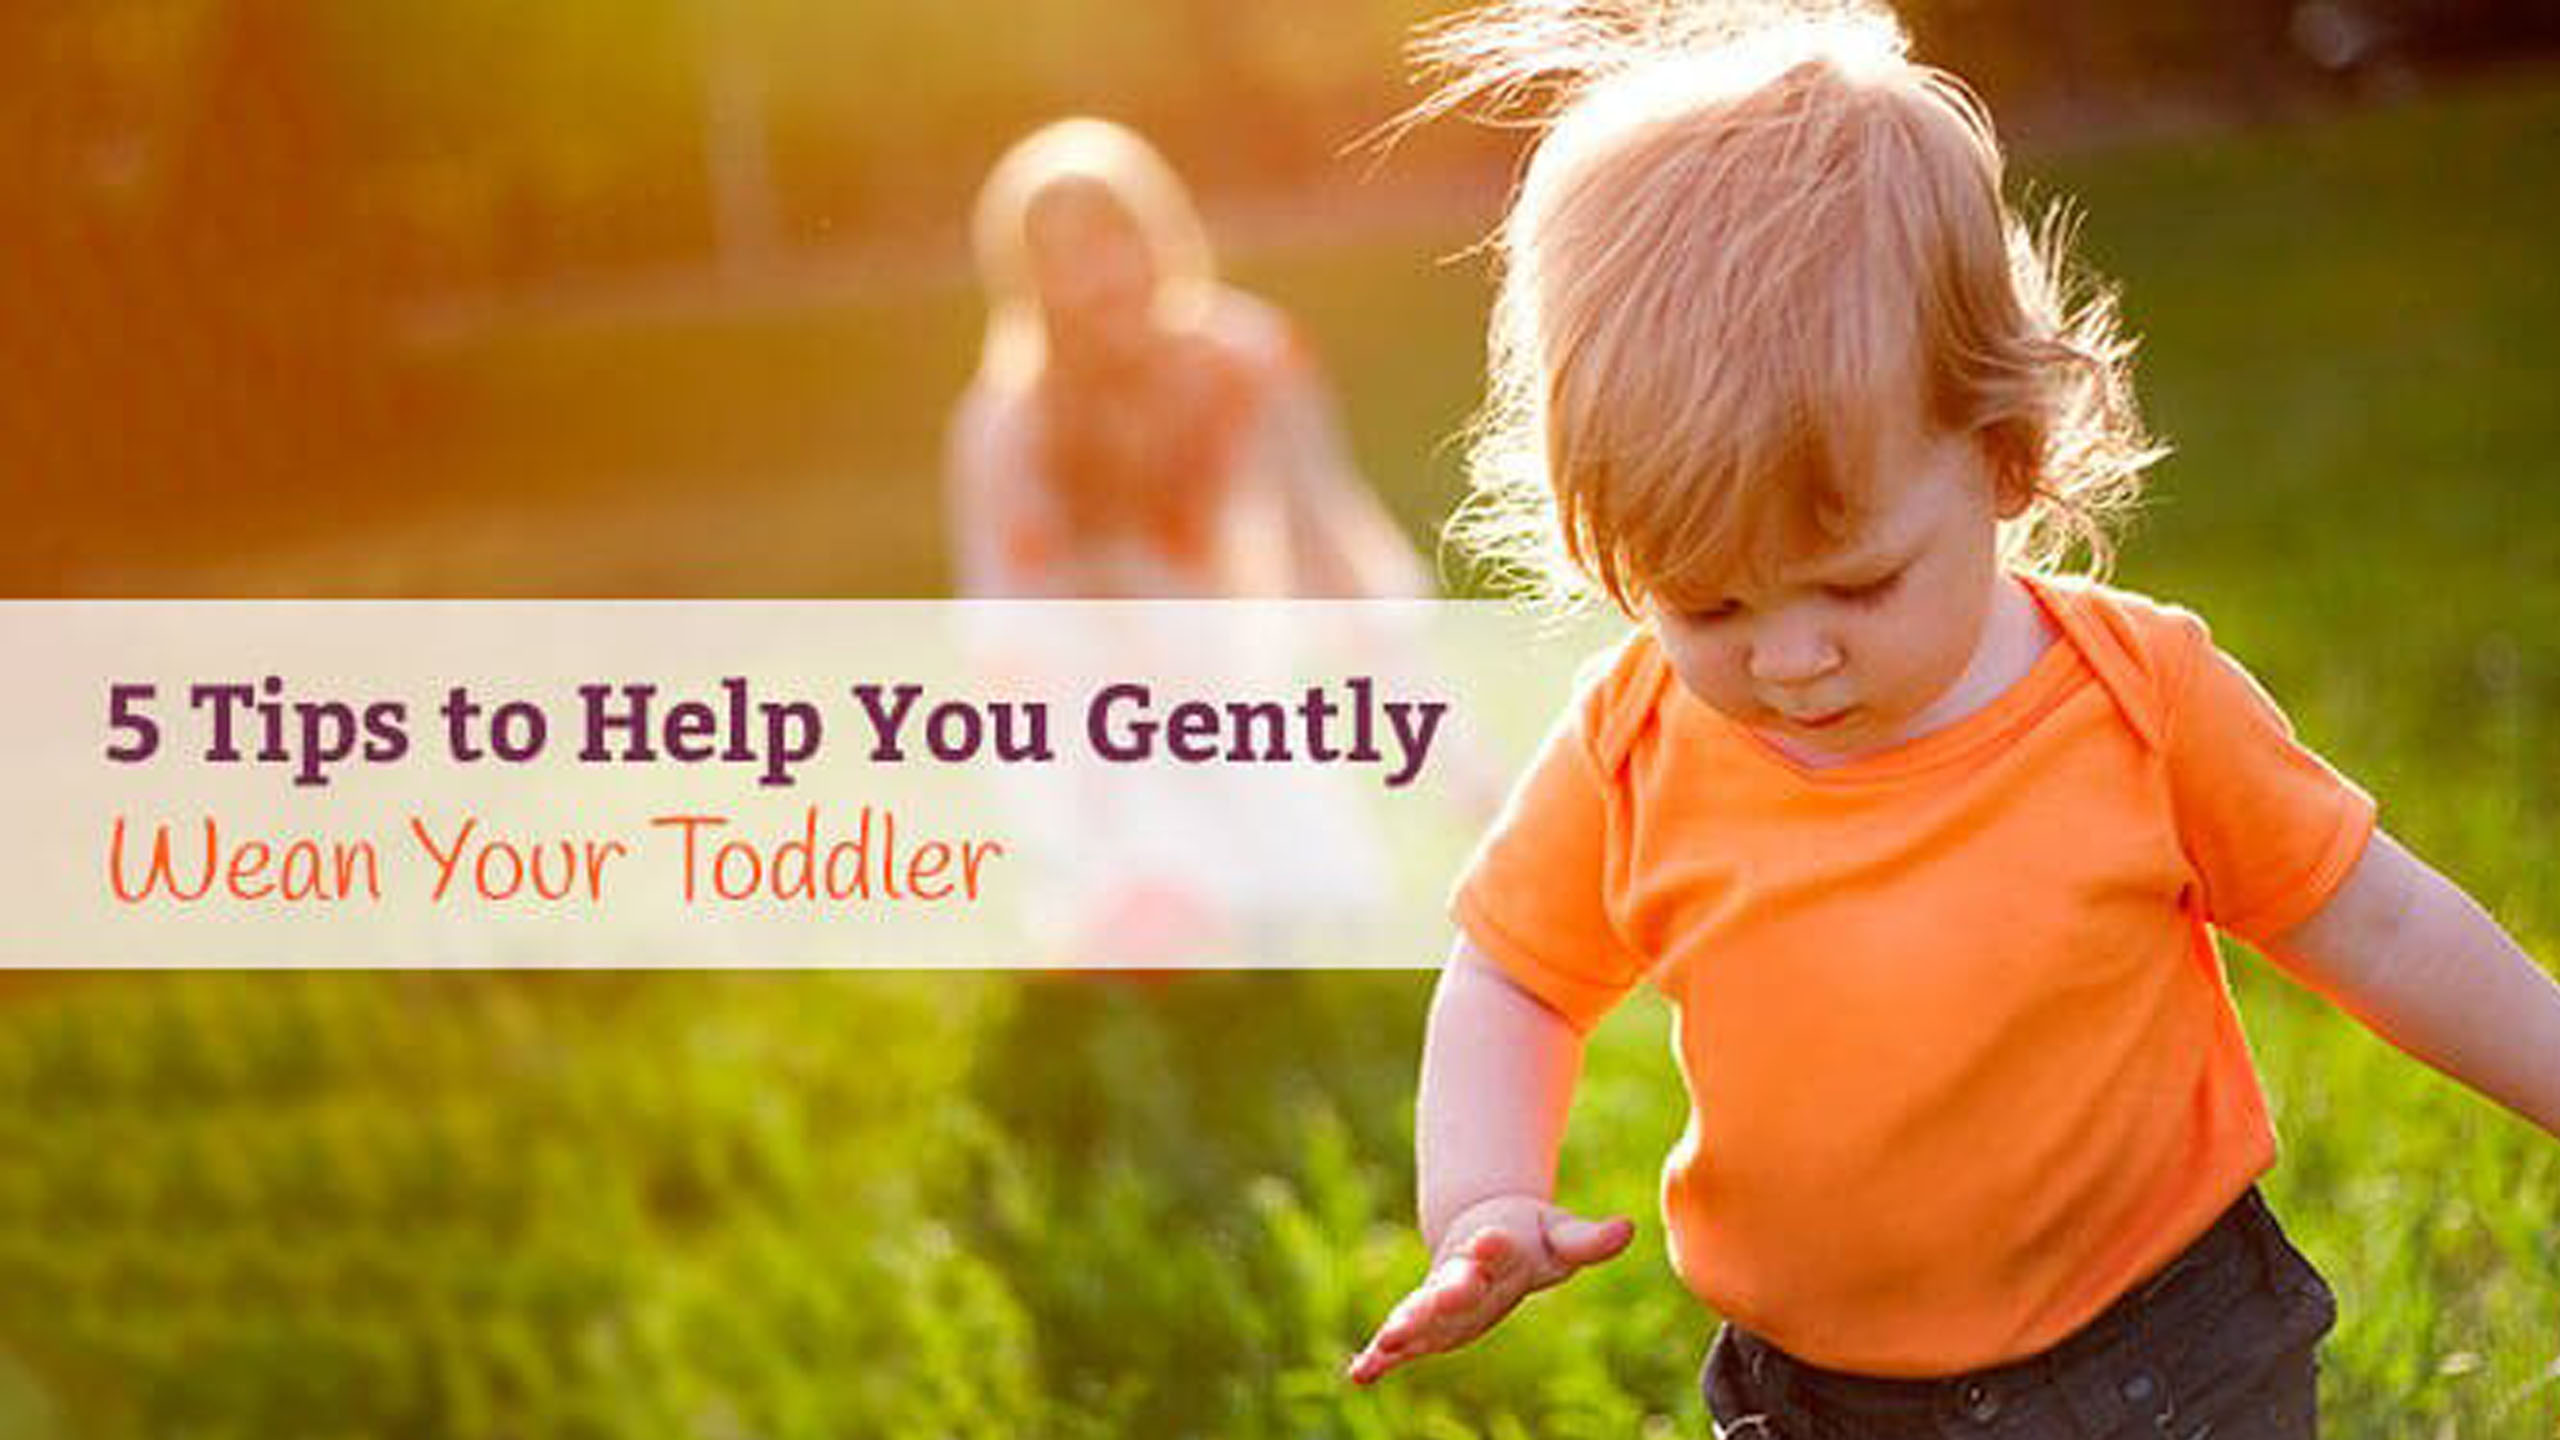 https://www.mamanatural.com/wp-content/uploads/5-Tips-to-Help-You-Gently-Wean-Your-Toddler-post-by-Mama-Natural.jpg